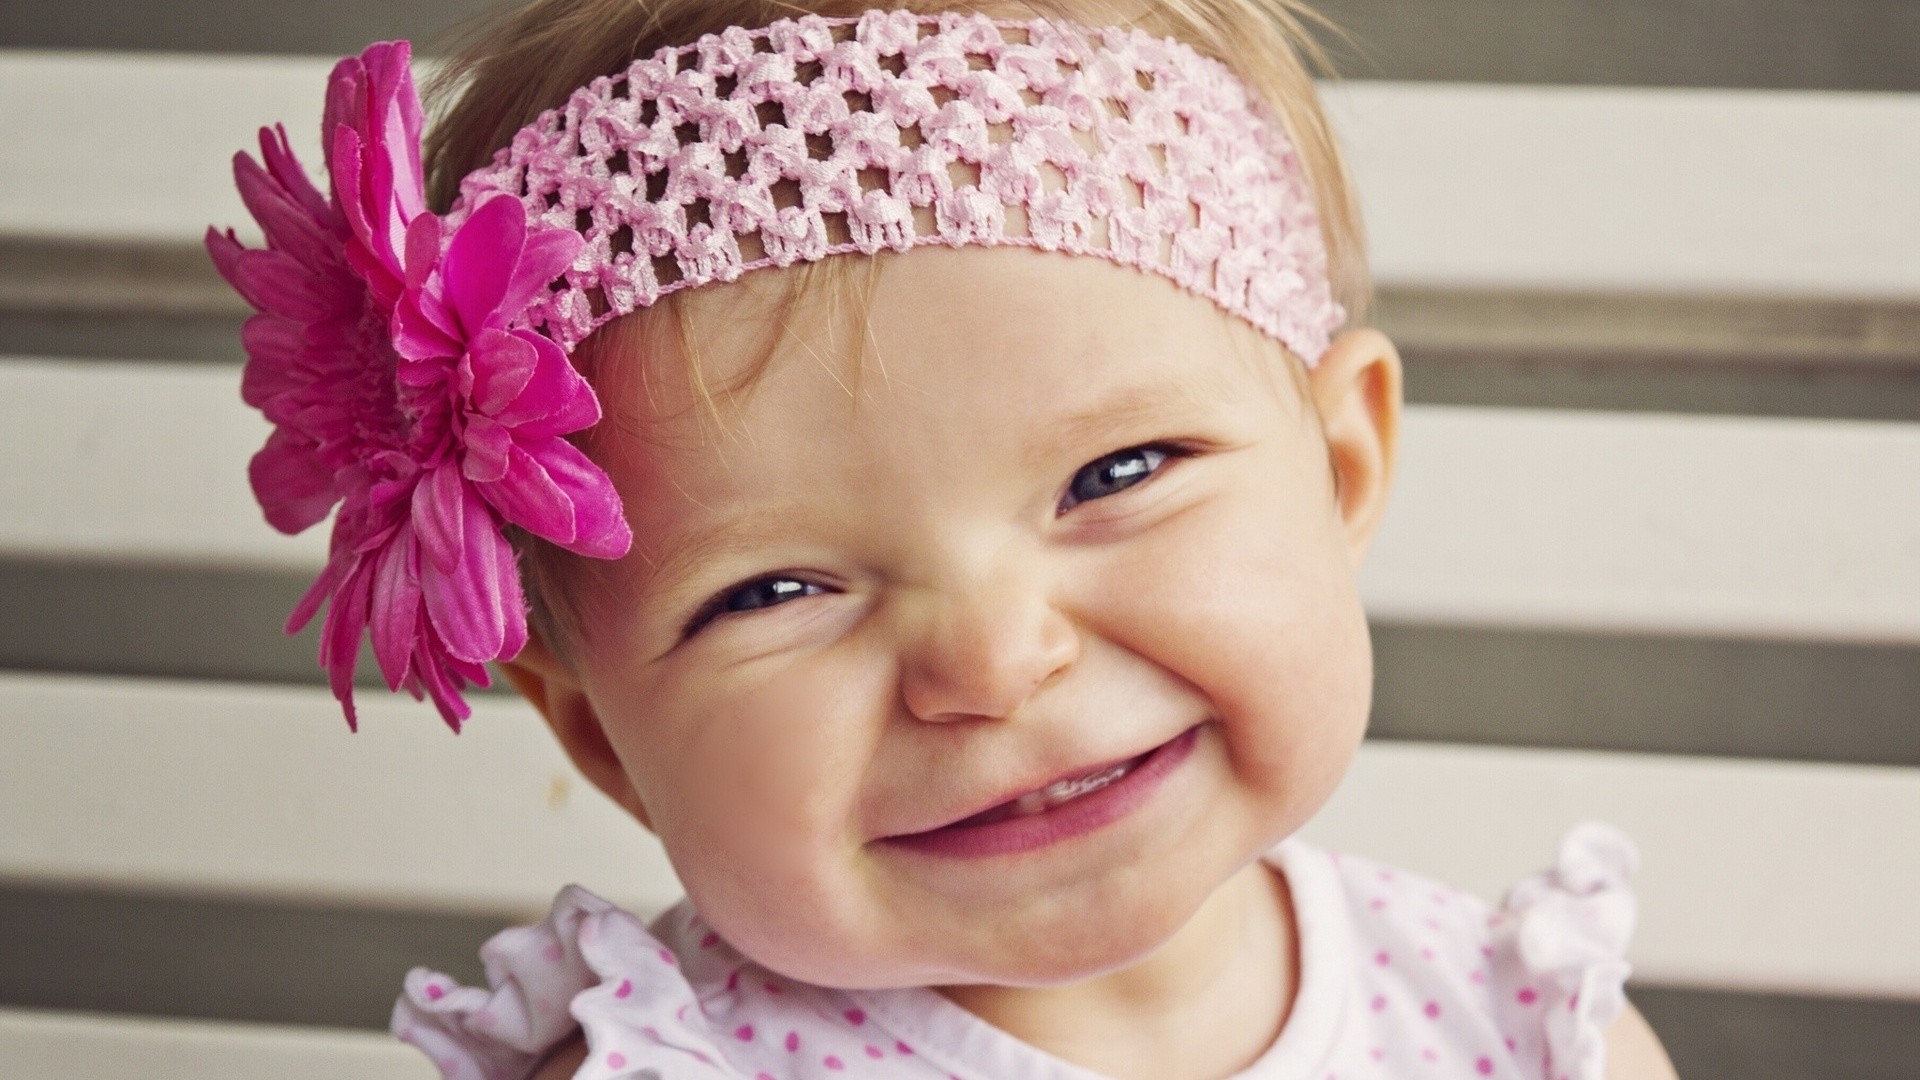 1920x1080 Small and Cute Baby Wallpaper download (13)